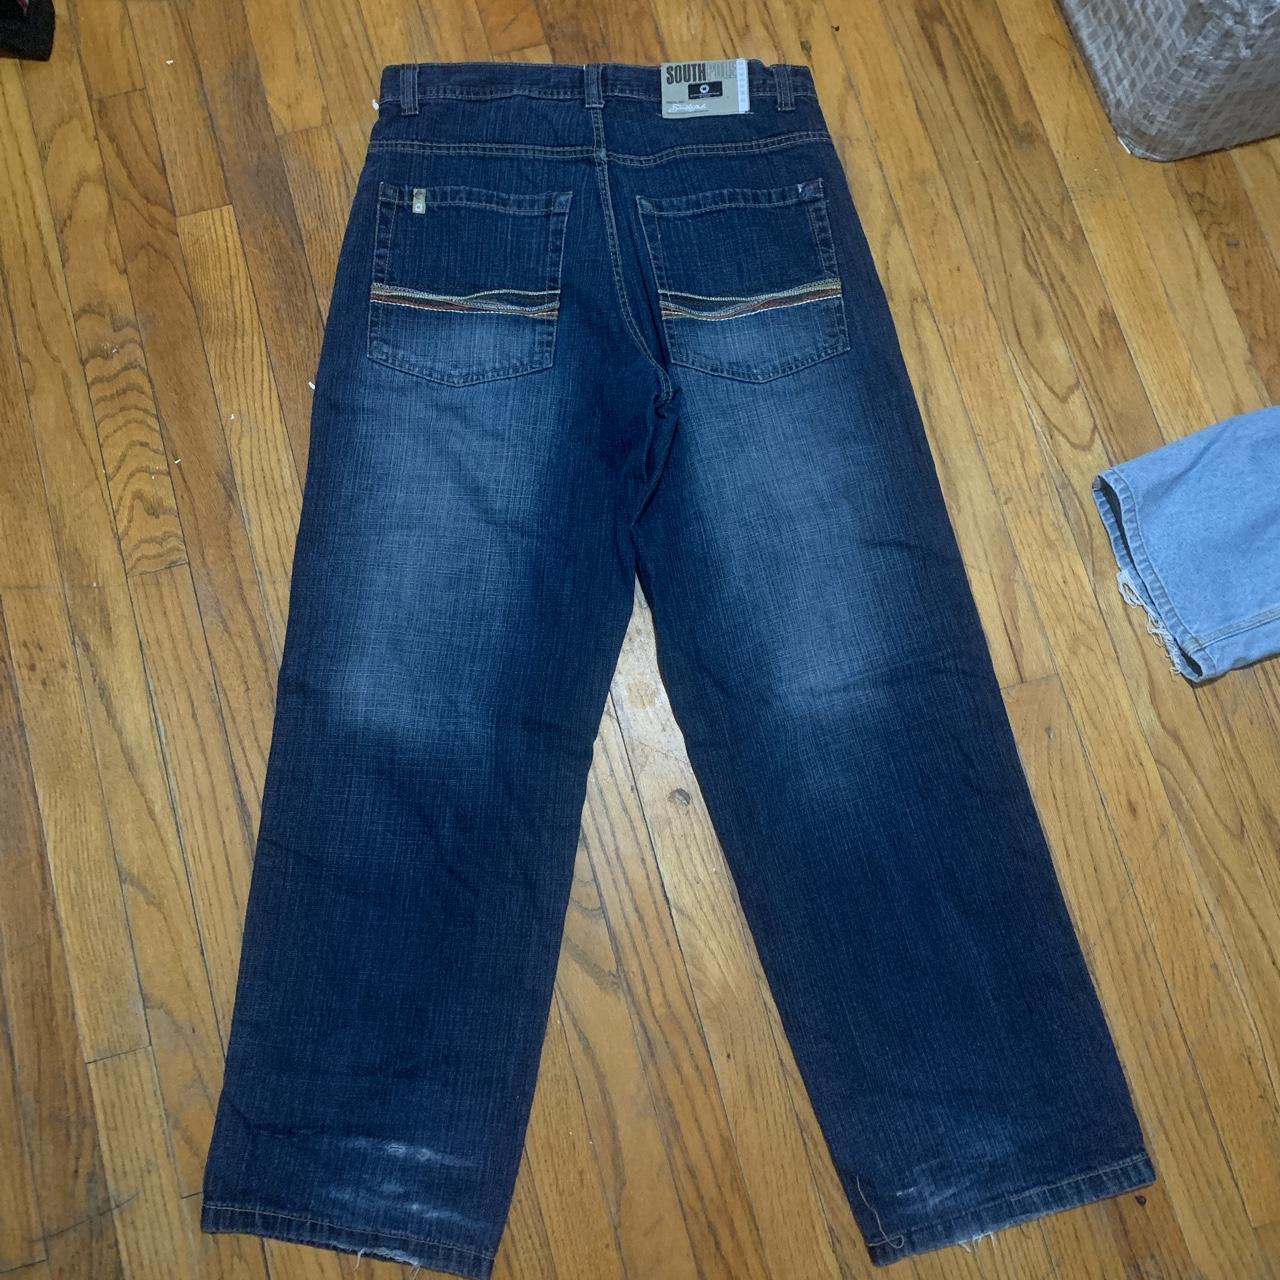 Super sick south pole jeans these fit baggy dark... - Depop